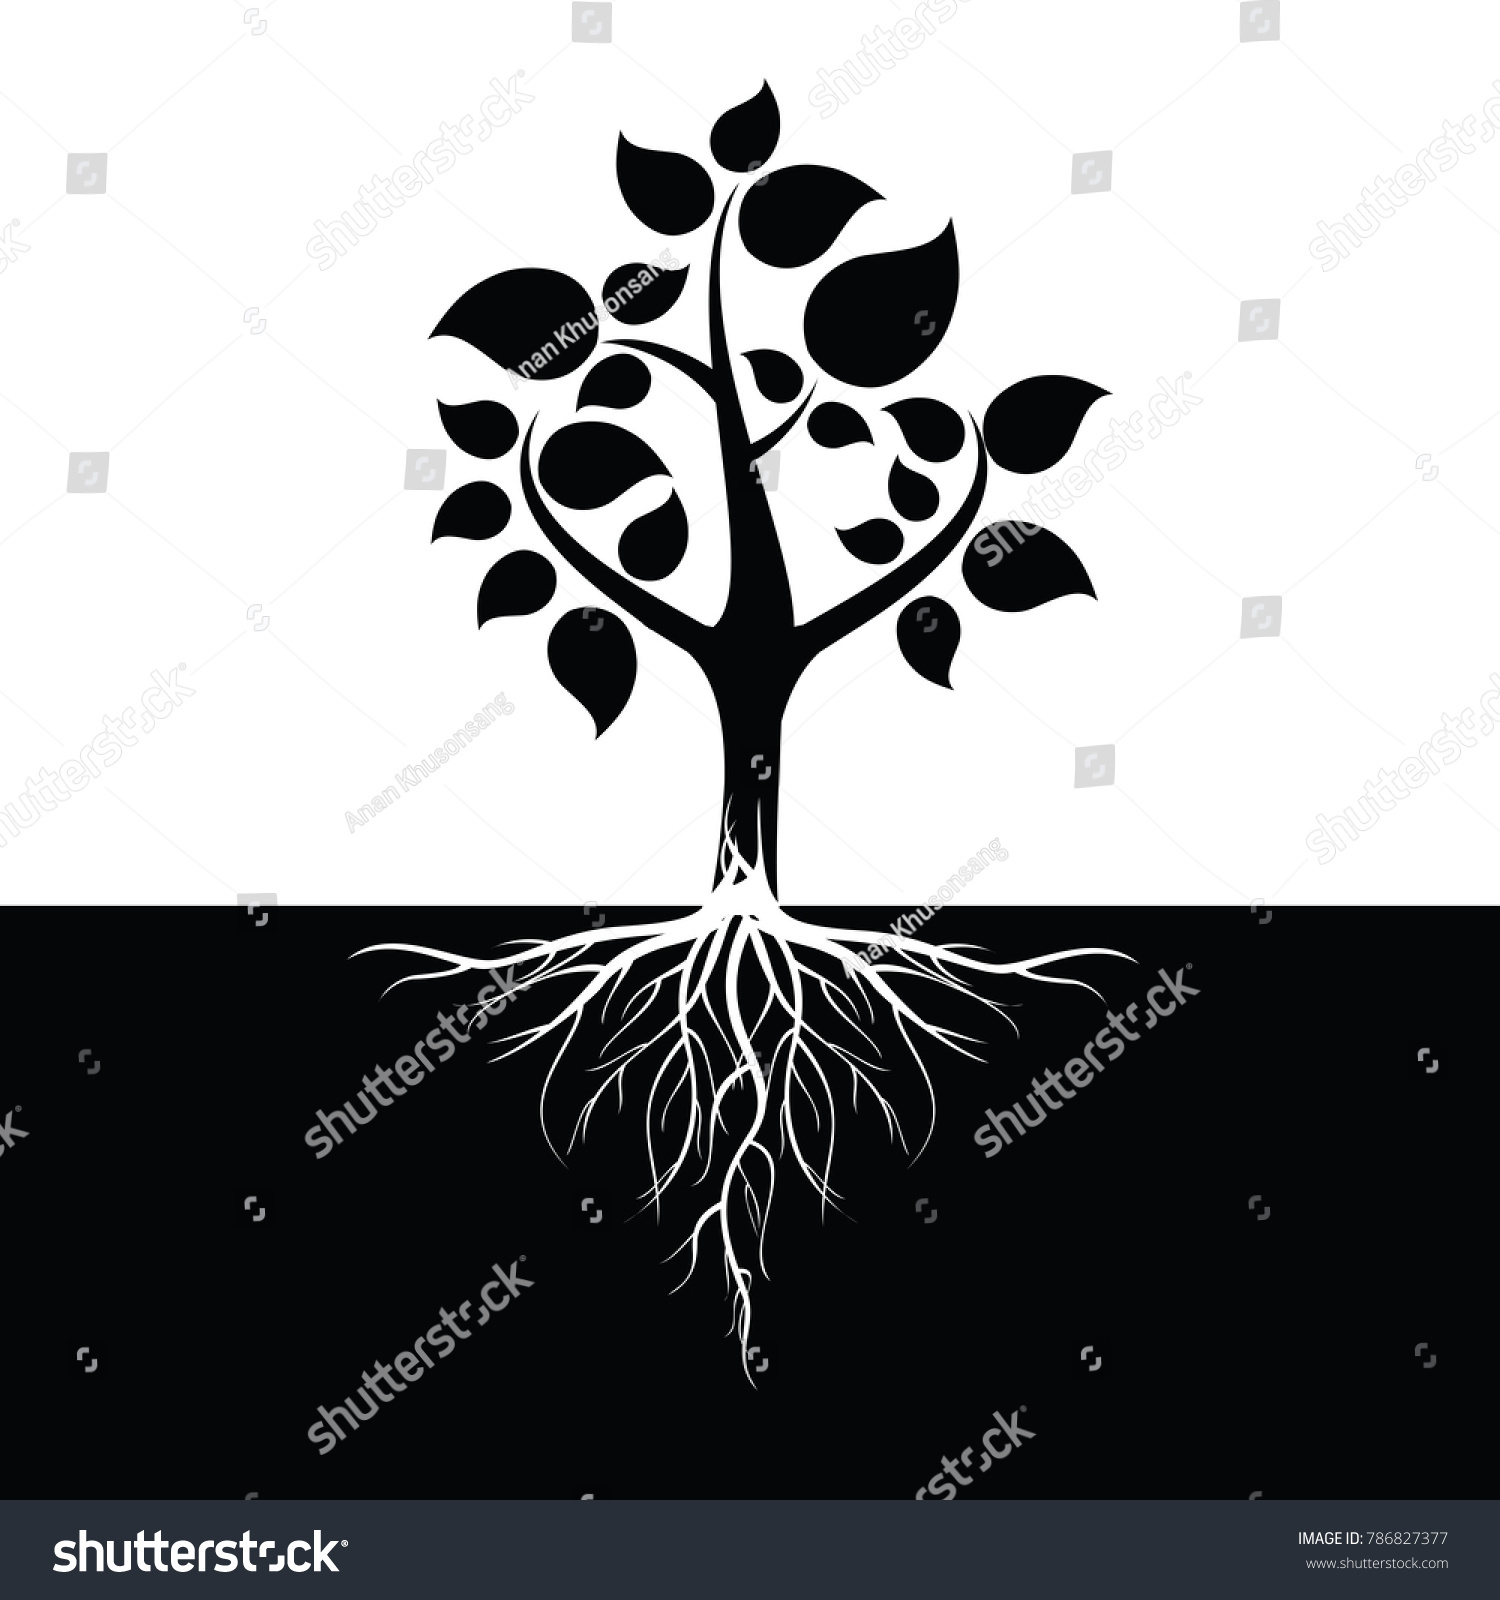 SVG of Black leafy tree with roots With trees isolated from white background. svg